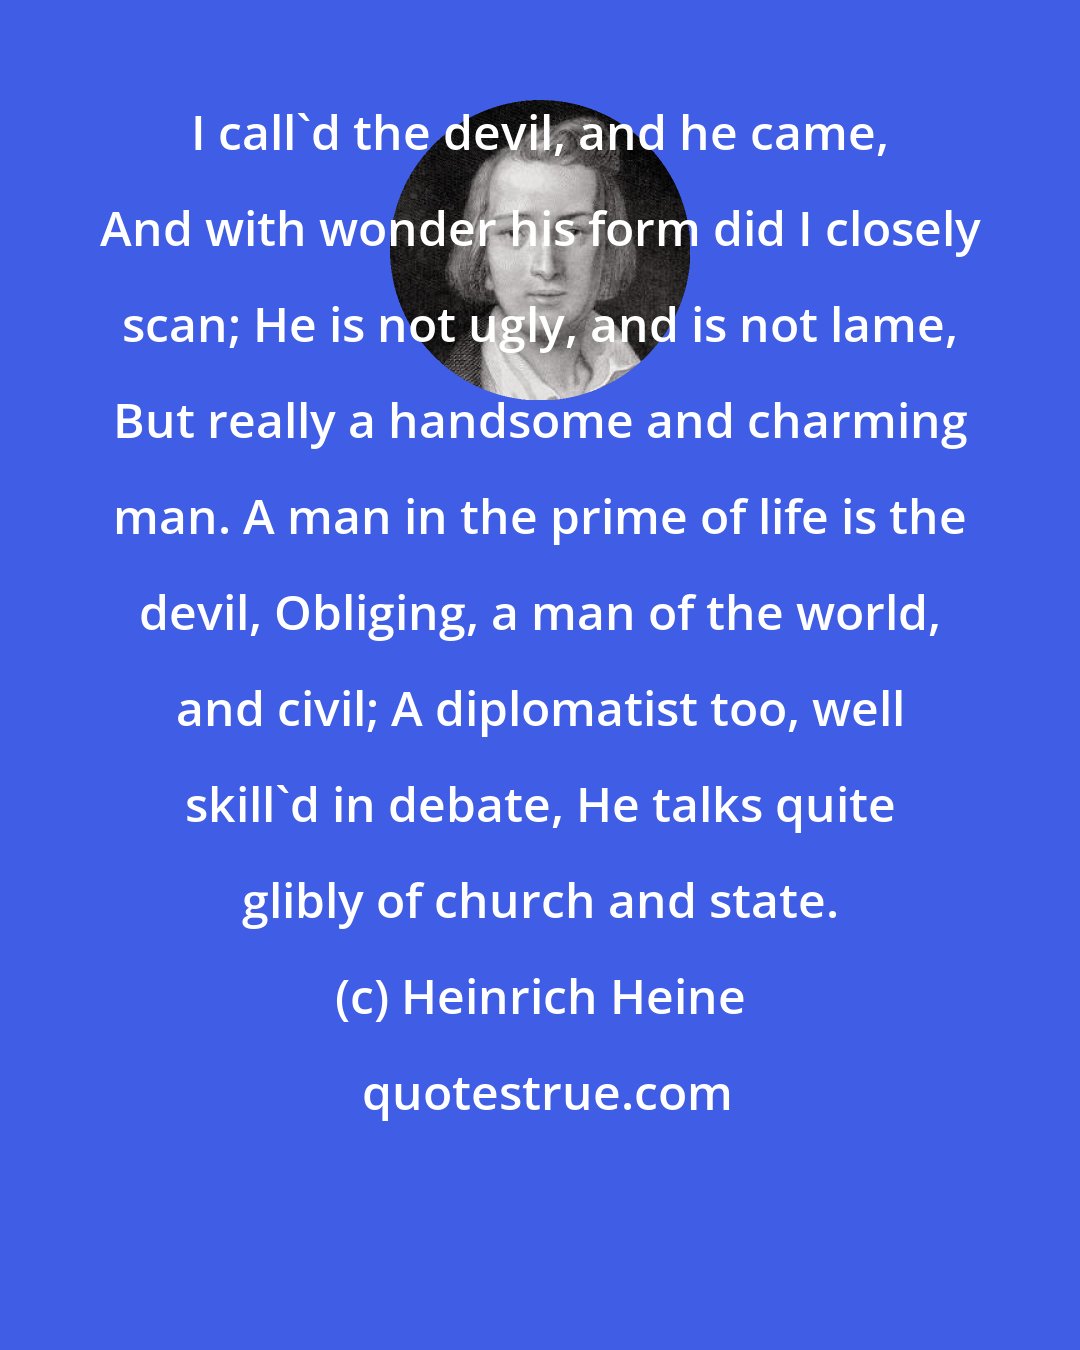 Heinrich Heine: I call'd the devil, and he came, And with wonder his form did I closely scan; He is not ugly, and is not lame, But really a handsome and charming man. A man in the prime of life is the devil, Obliging, a man of the world, and civil; A diplomatist too, well skill'd in debate, He talks quite glibly of church and state.